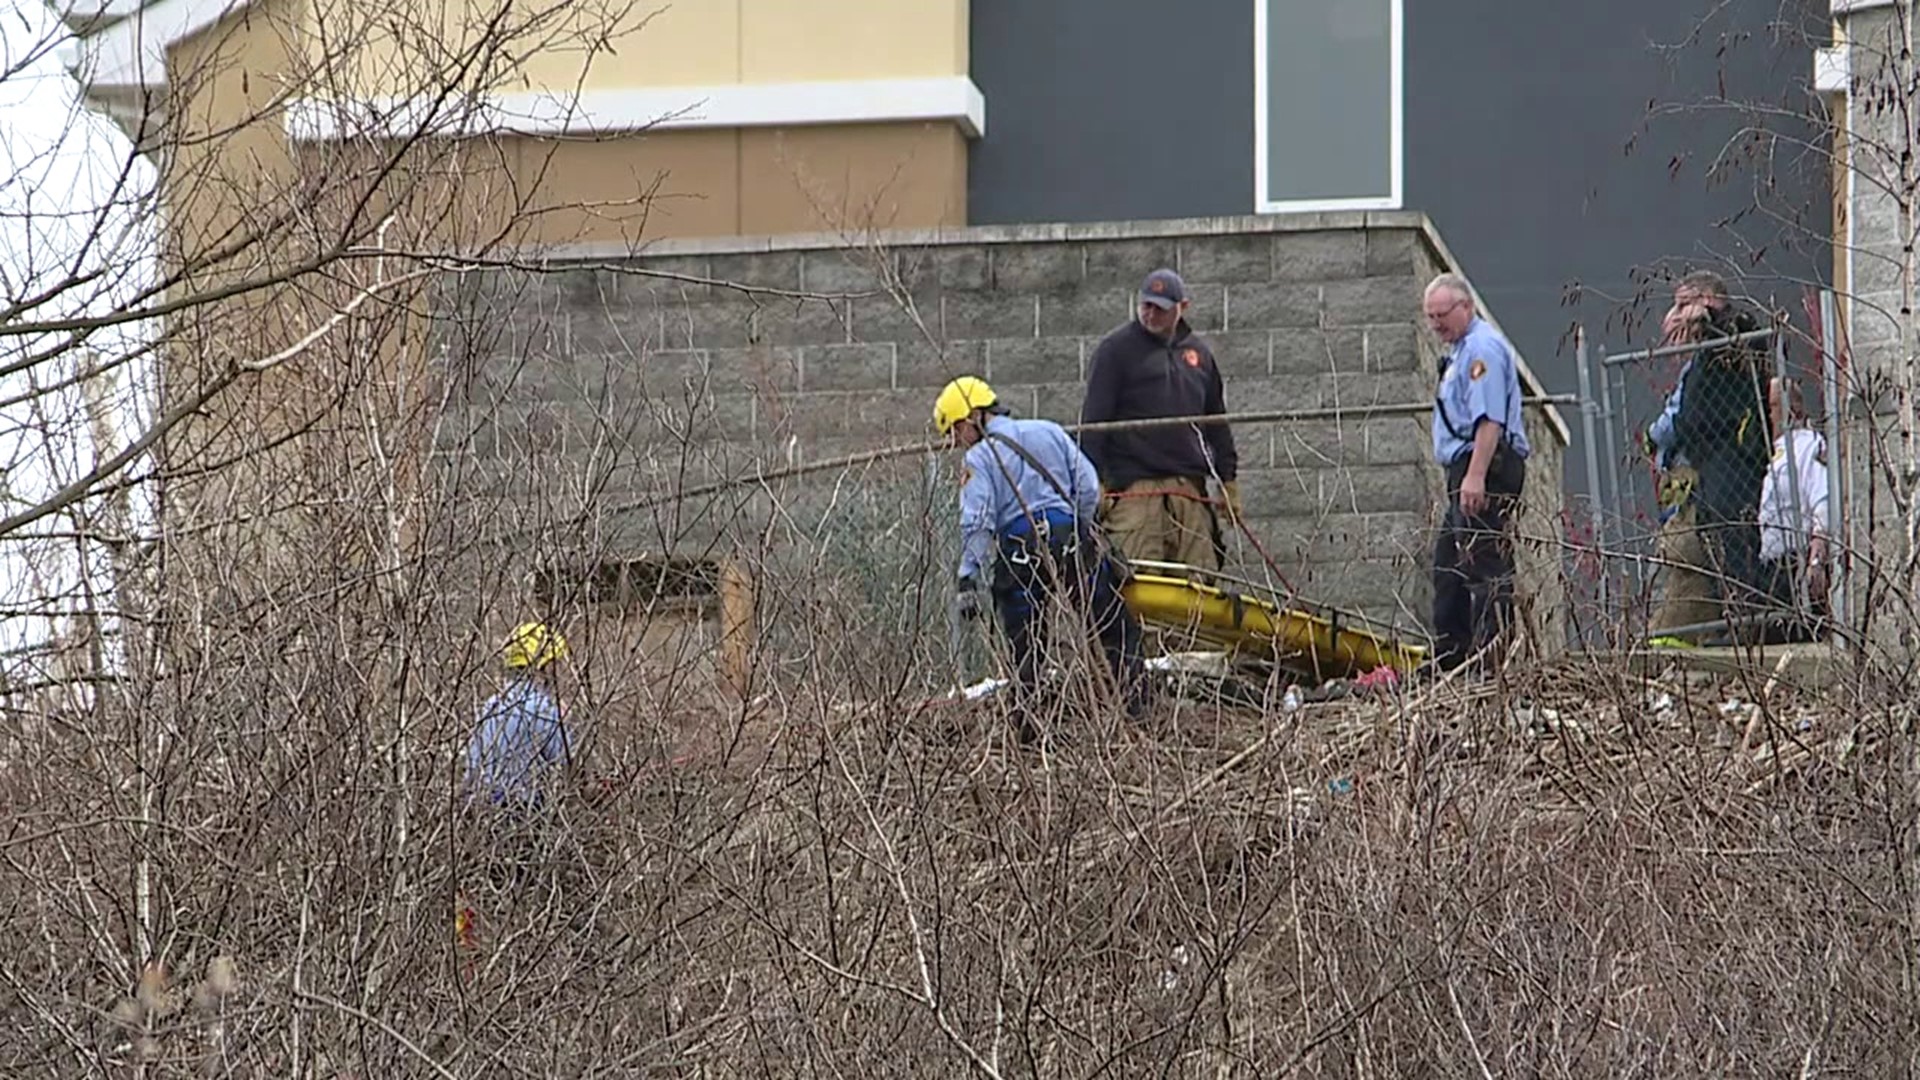 Investigators were called Tuesday afternoon to a wooded area between the Cross Valley Expressway and Kidder Street.